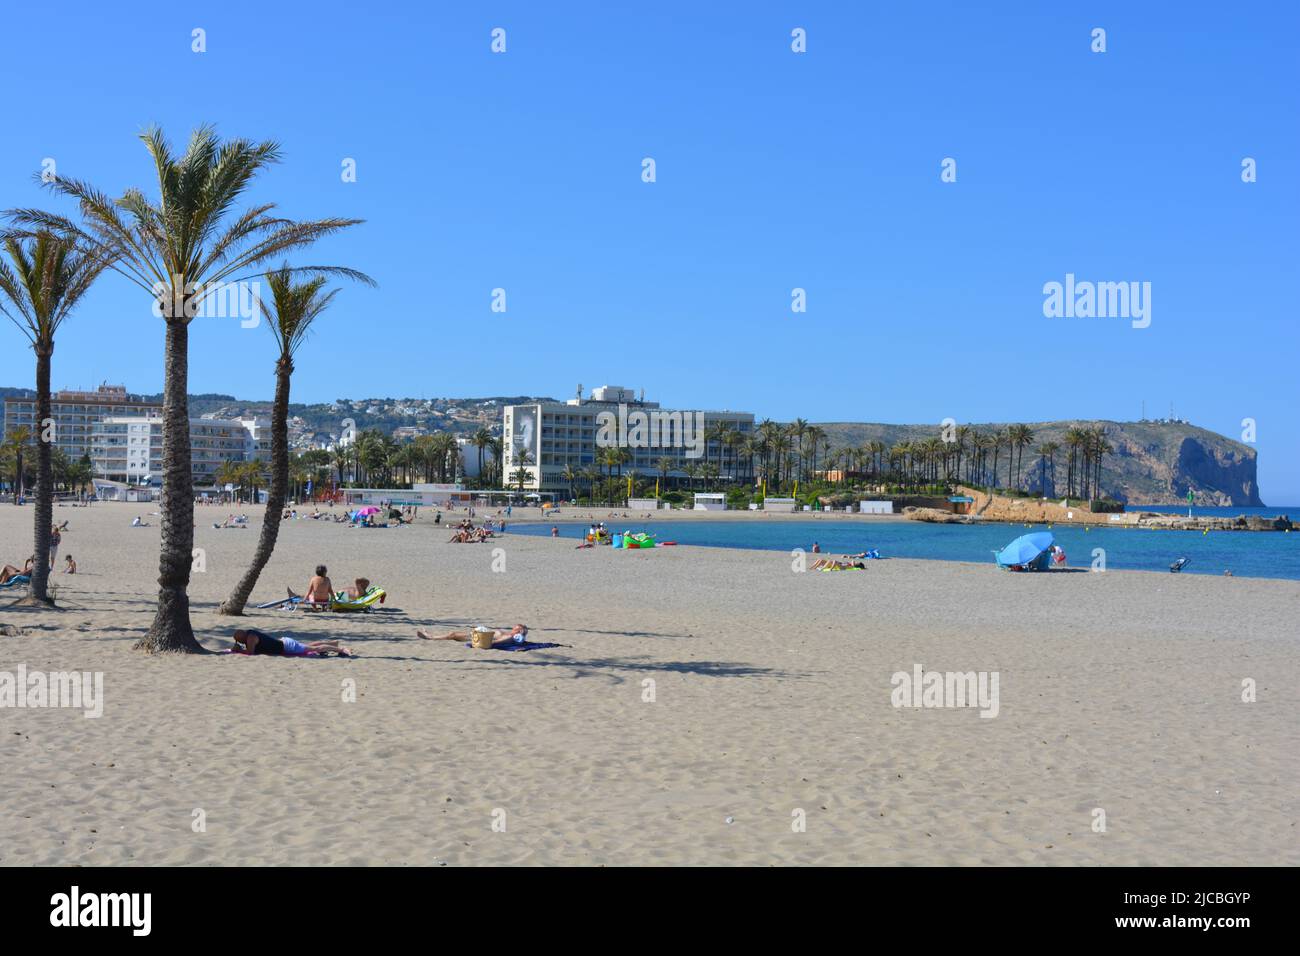 Tourists on Arenal beach with Parador and Cabo San Antonio  behind, Javea, Alicante, Spain Stock Photo